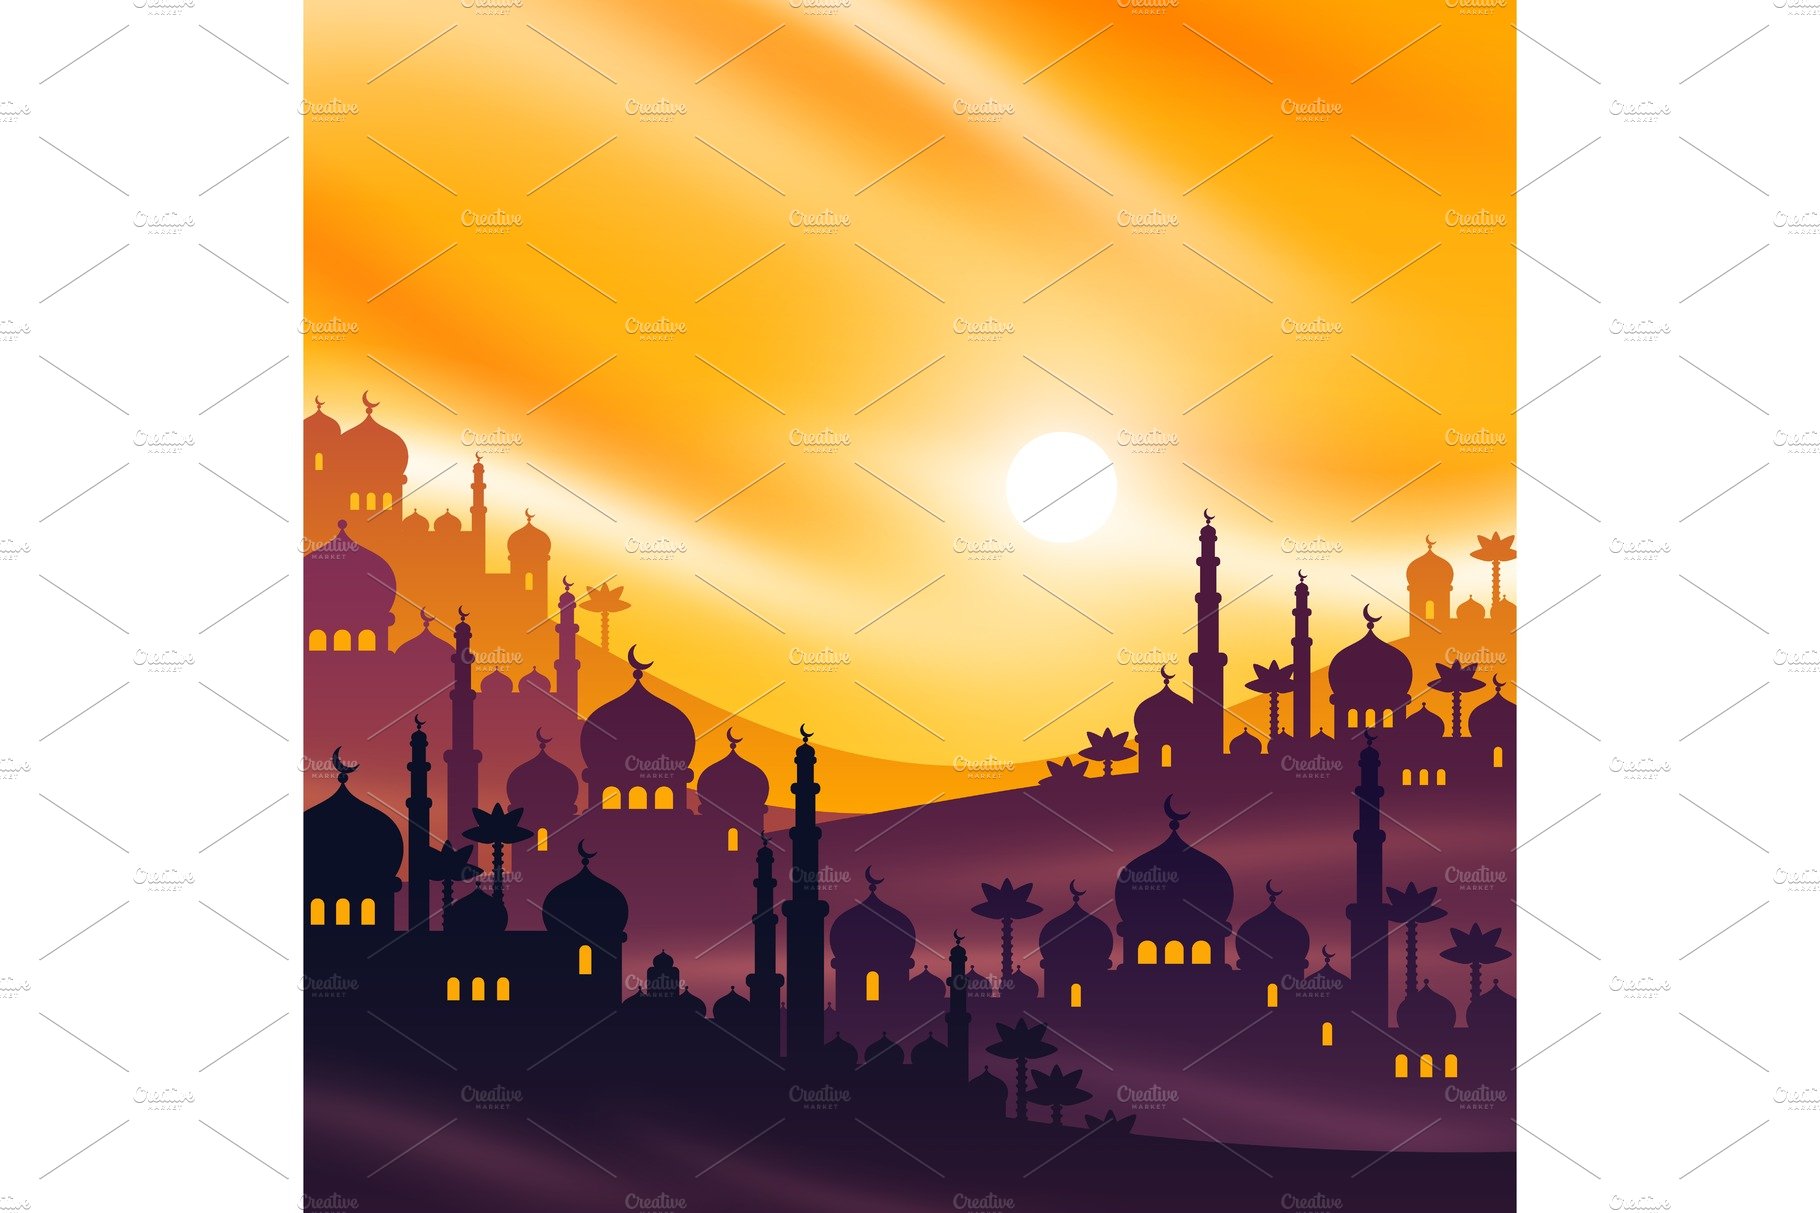 Arabian city at sunset cover image.